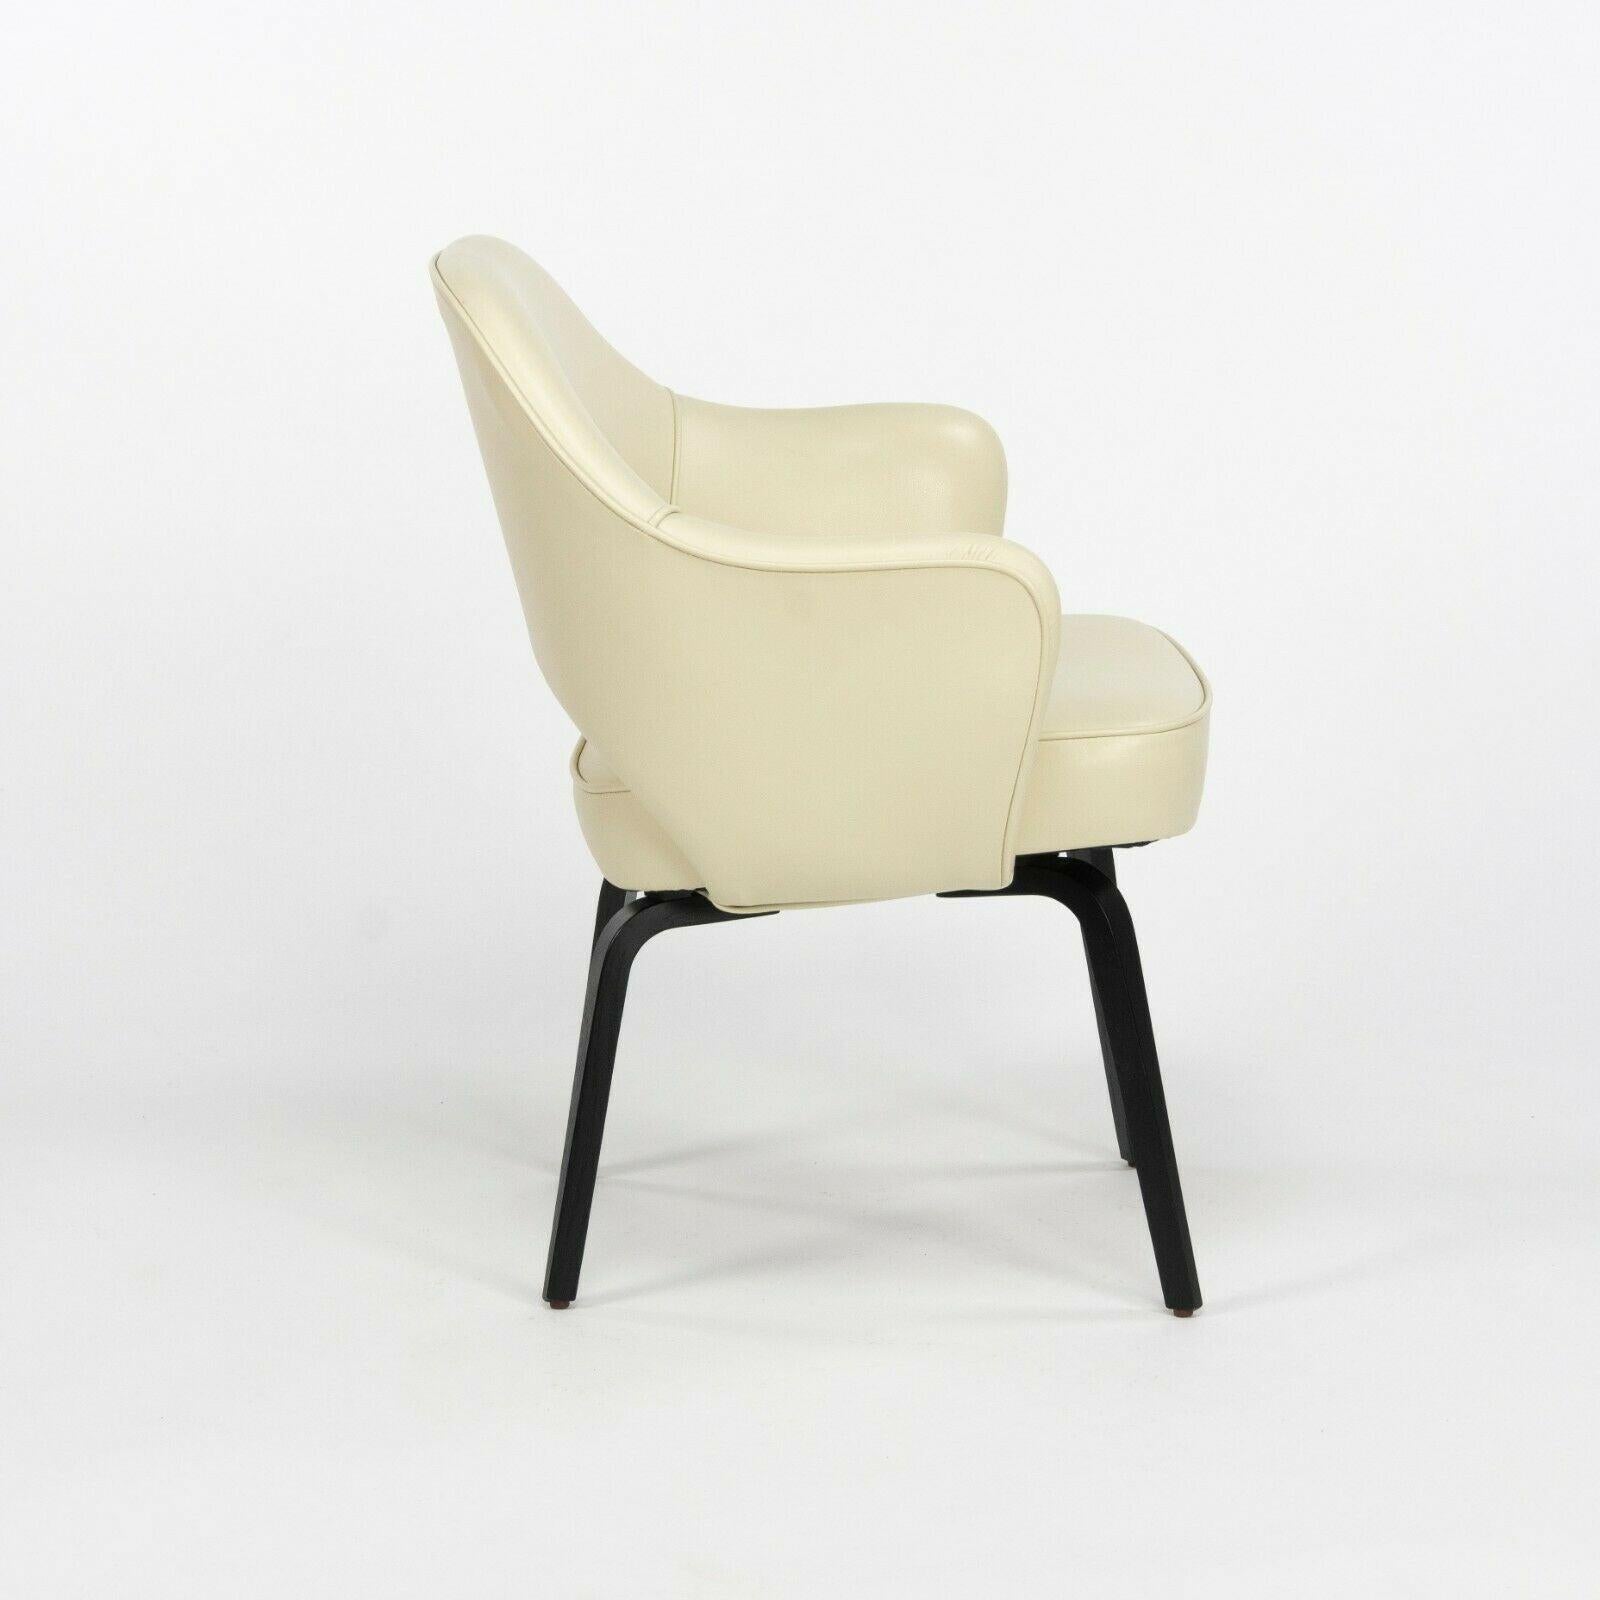 American Eero Saarinen for Knoll 2020 Executive Armchair with Ivory Leather & Wood Legs For Sale